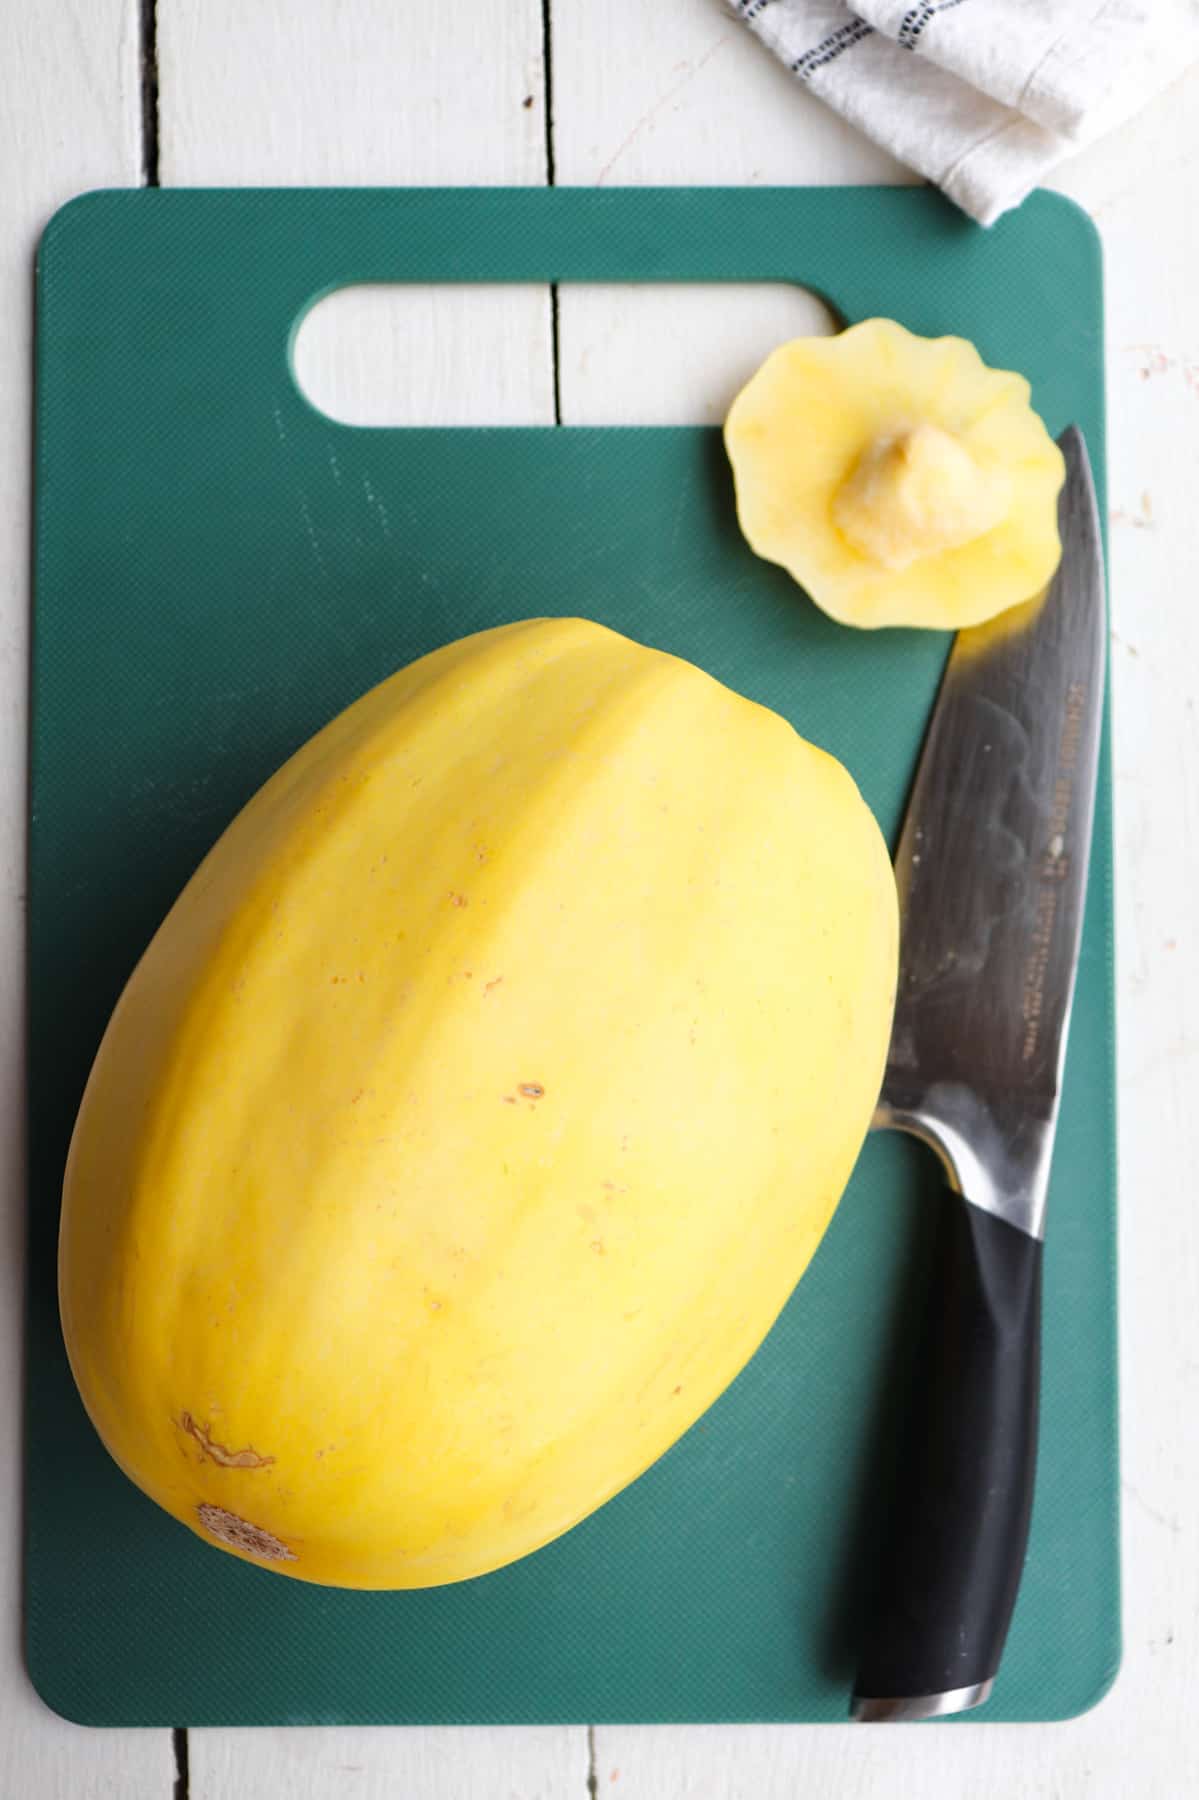 squash sitting on green cutting board with stem trimmed off.